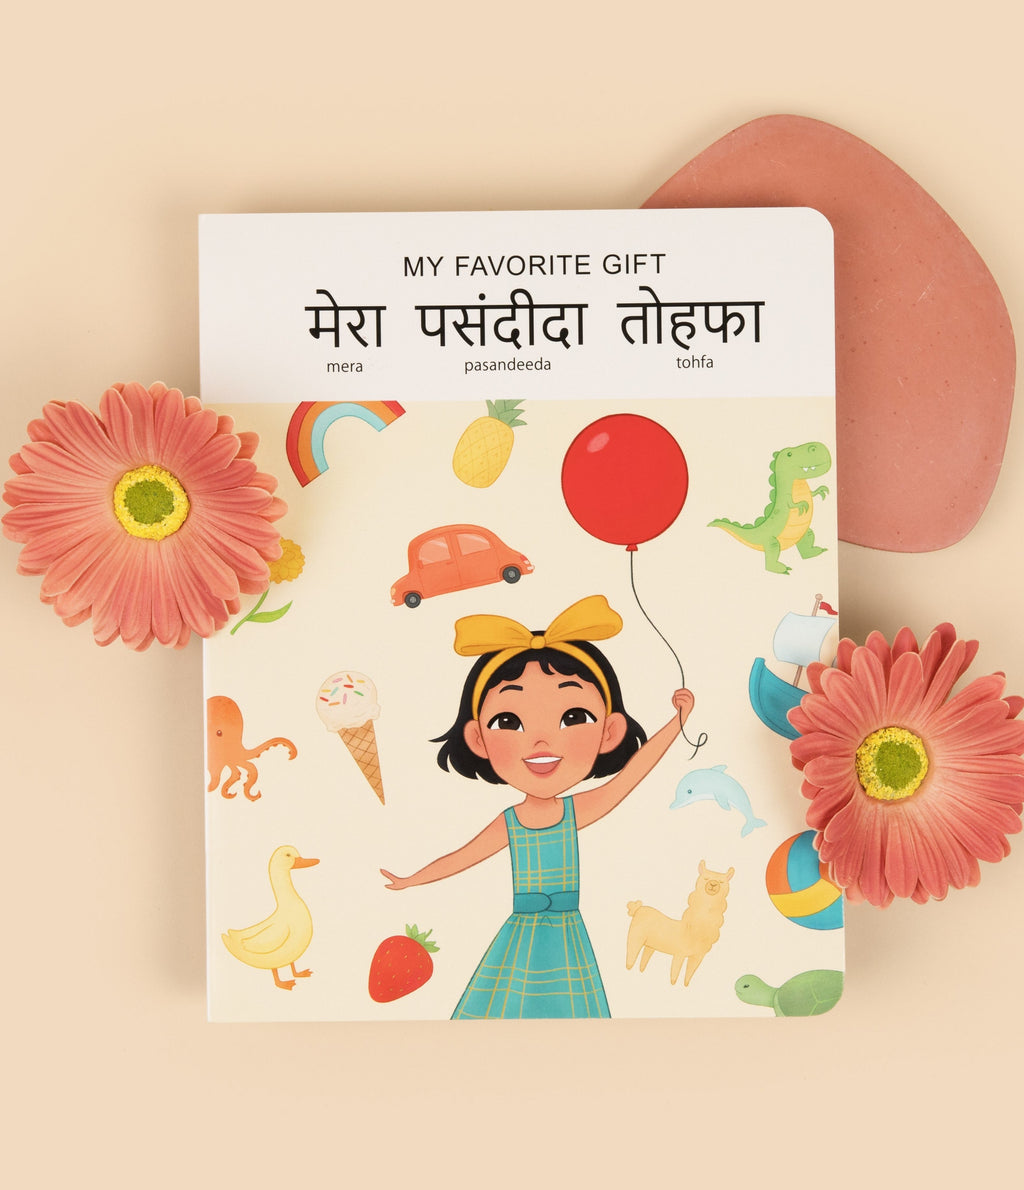 My Favorite Gift bilingual book in Hindi-English by Spark Collection